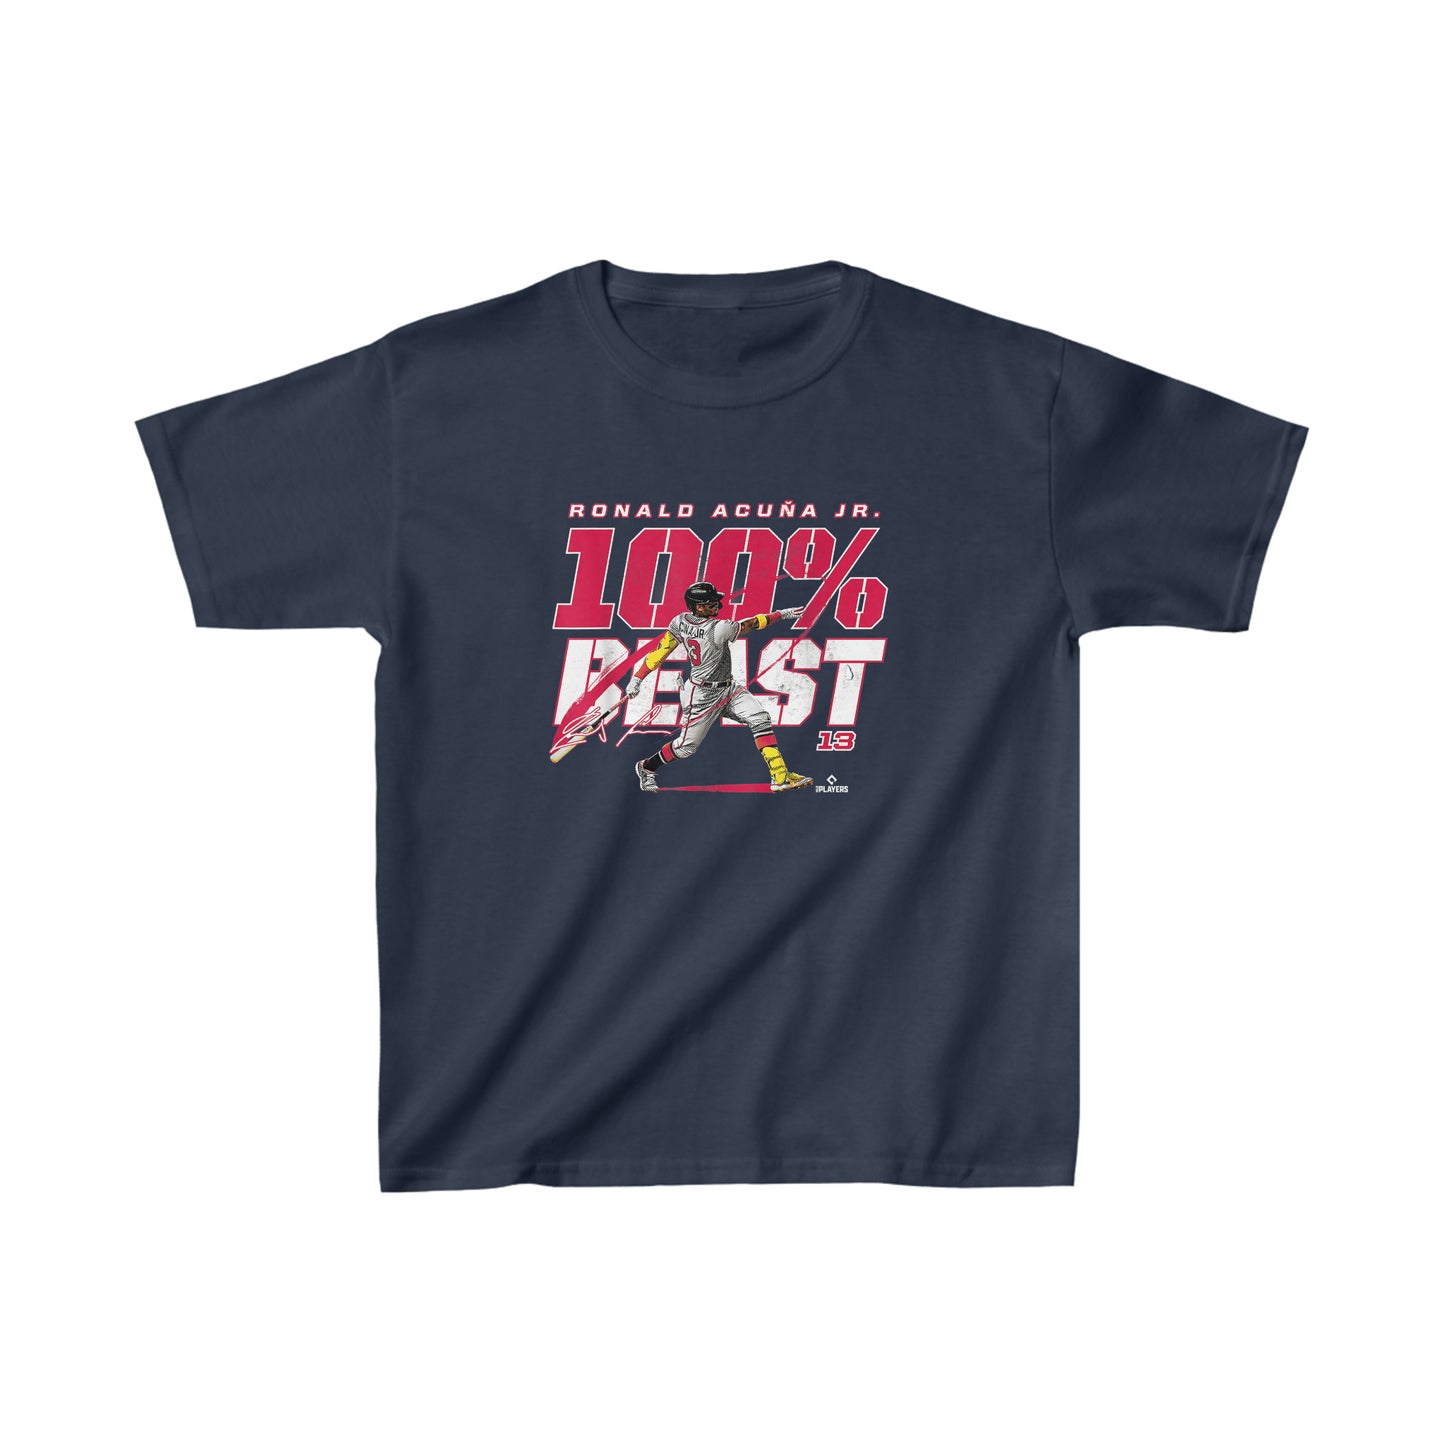 Ronald Acuña Jr. 100% BEAST Kids Fan T-Shirt - Soft Cotton Blend - Perfect for Young Braves Fans